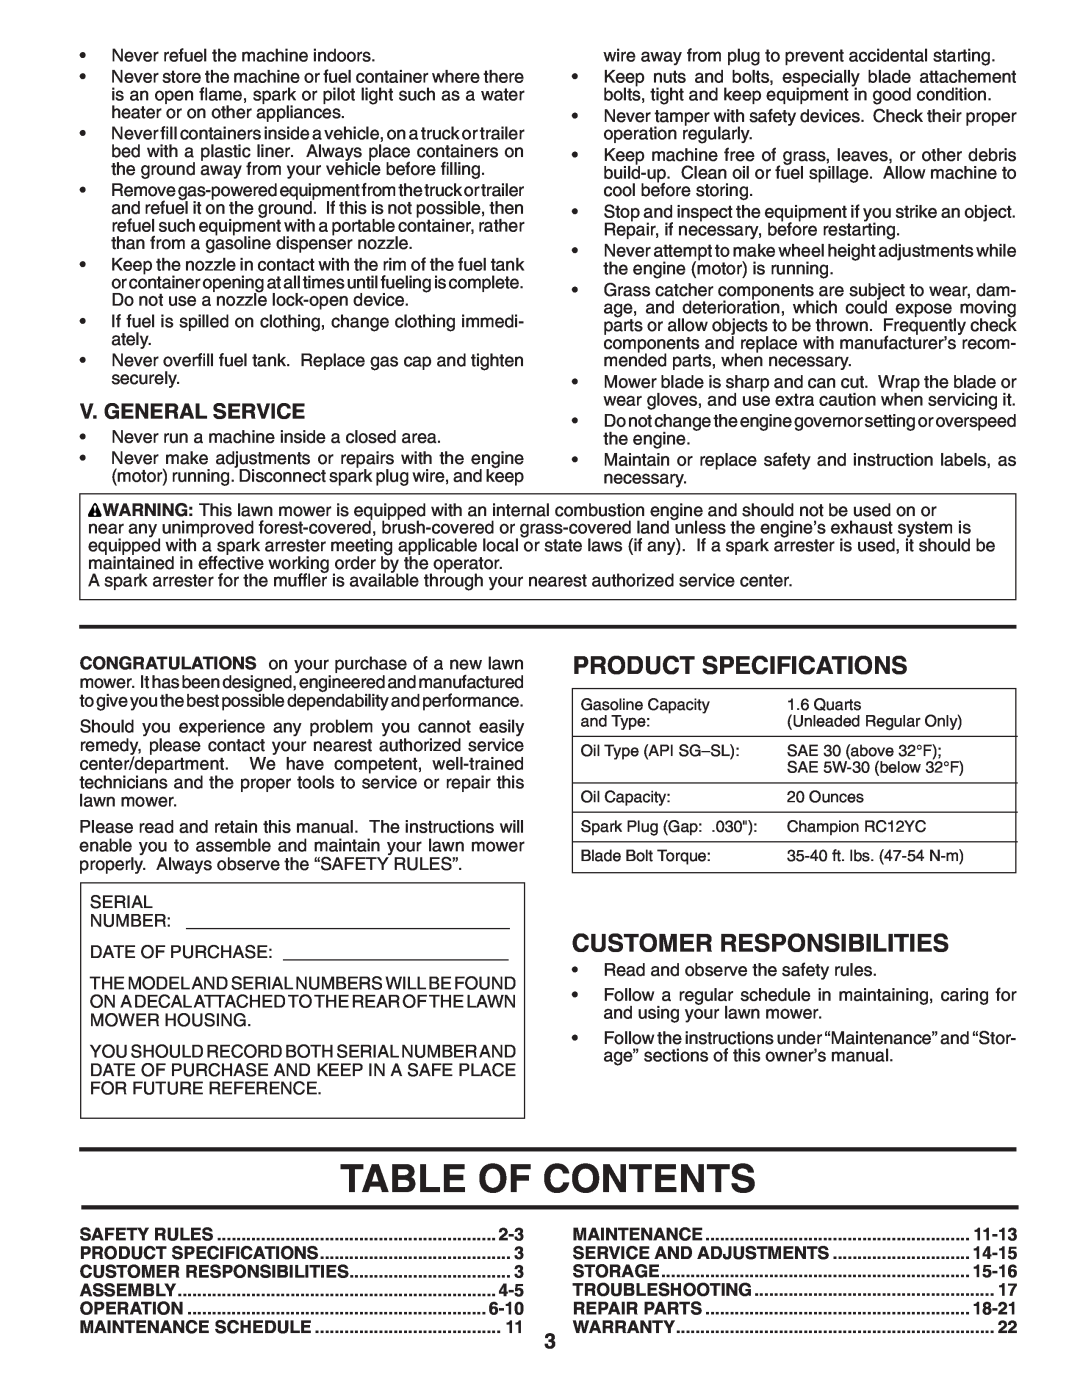 Husqvarna 87521RSX owner manual Table Of Contents, Product Specifications, Customer Responsibilities, V. General Service 